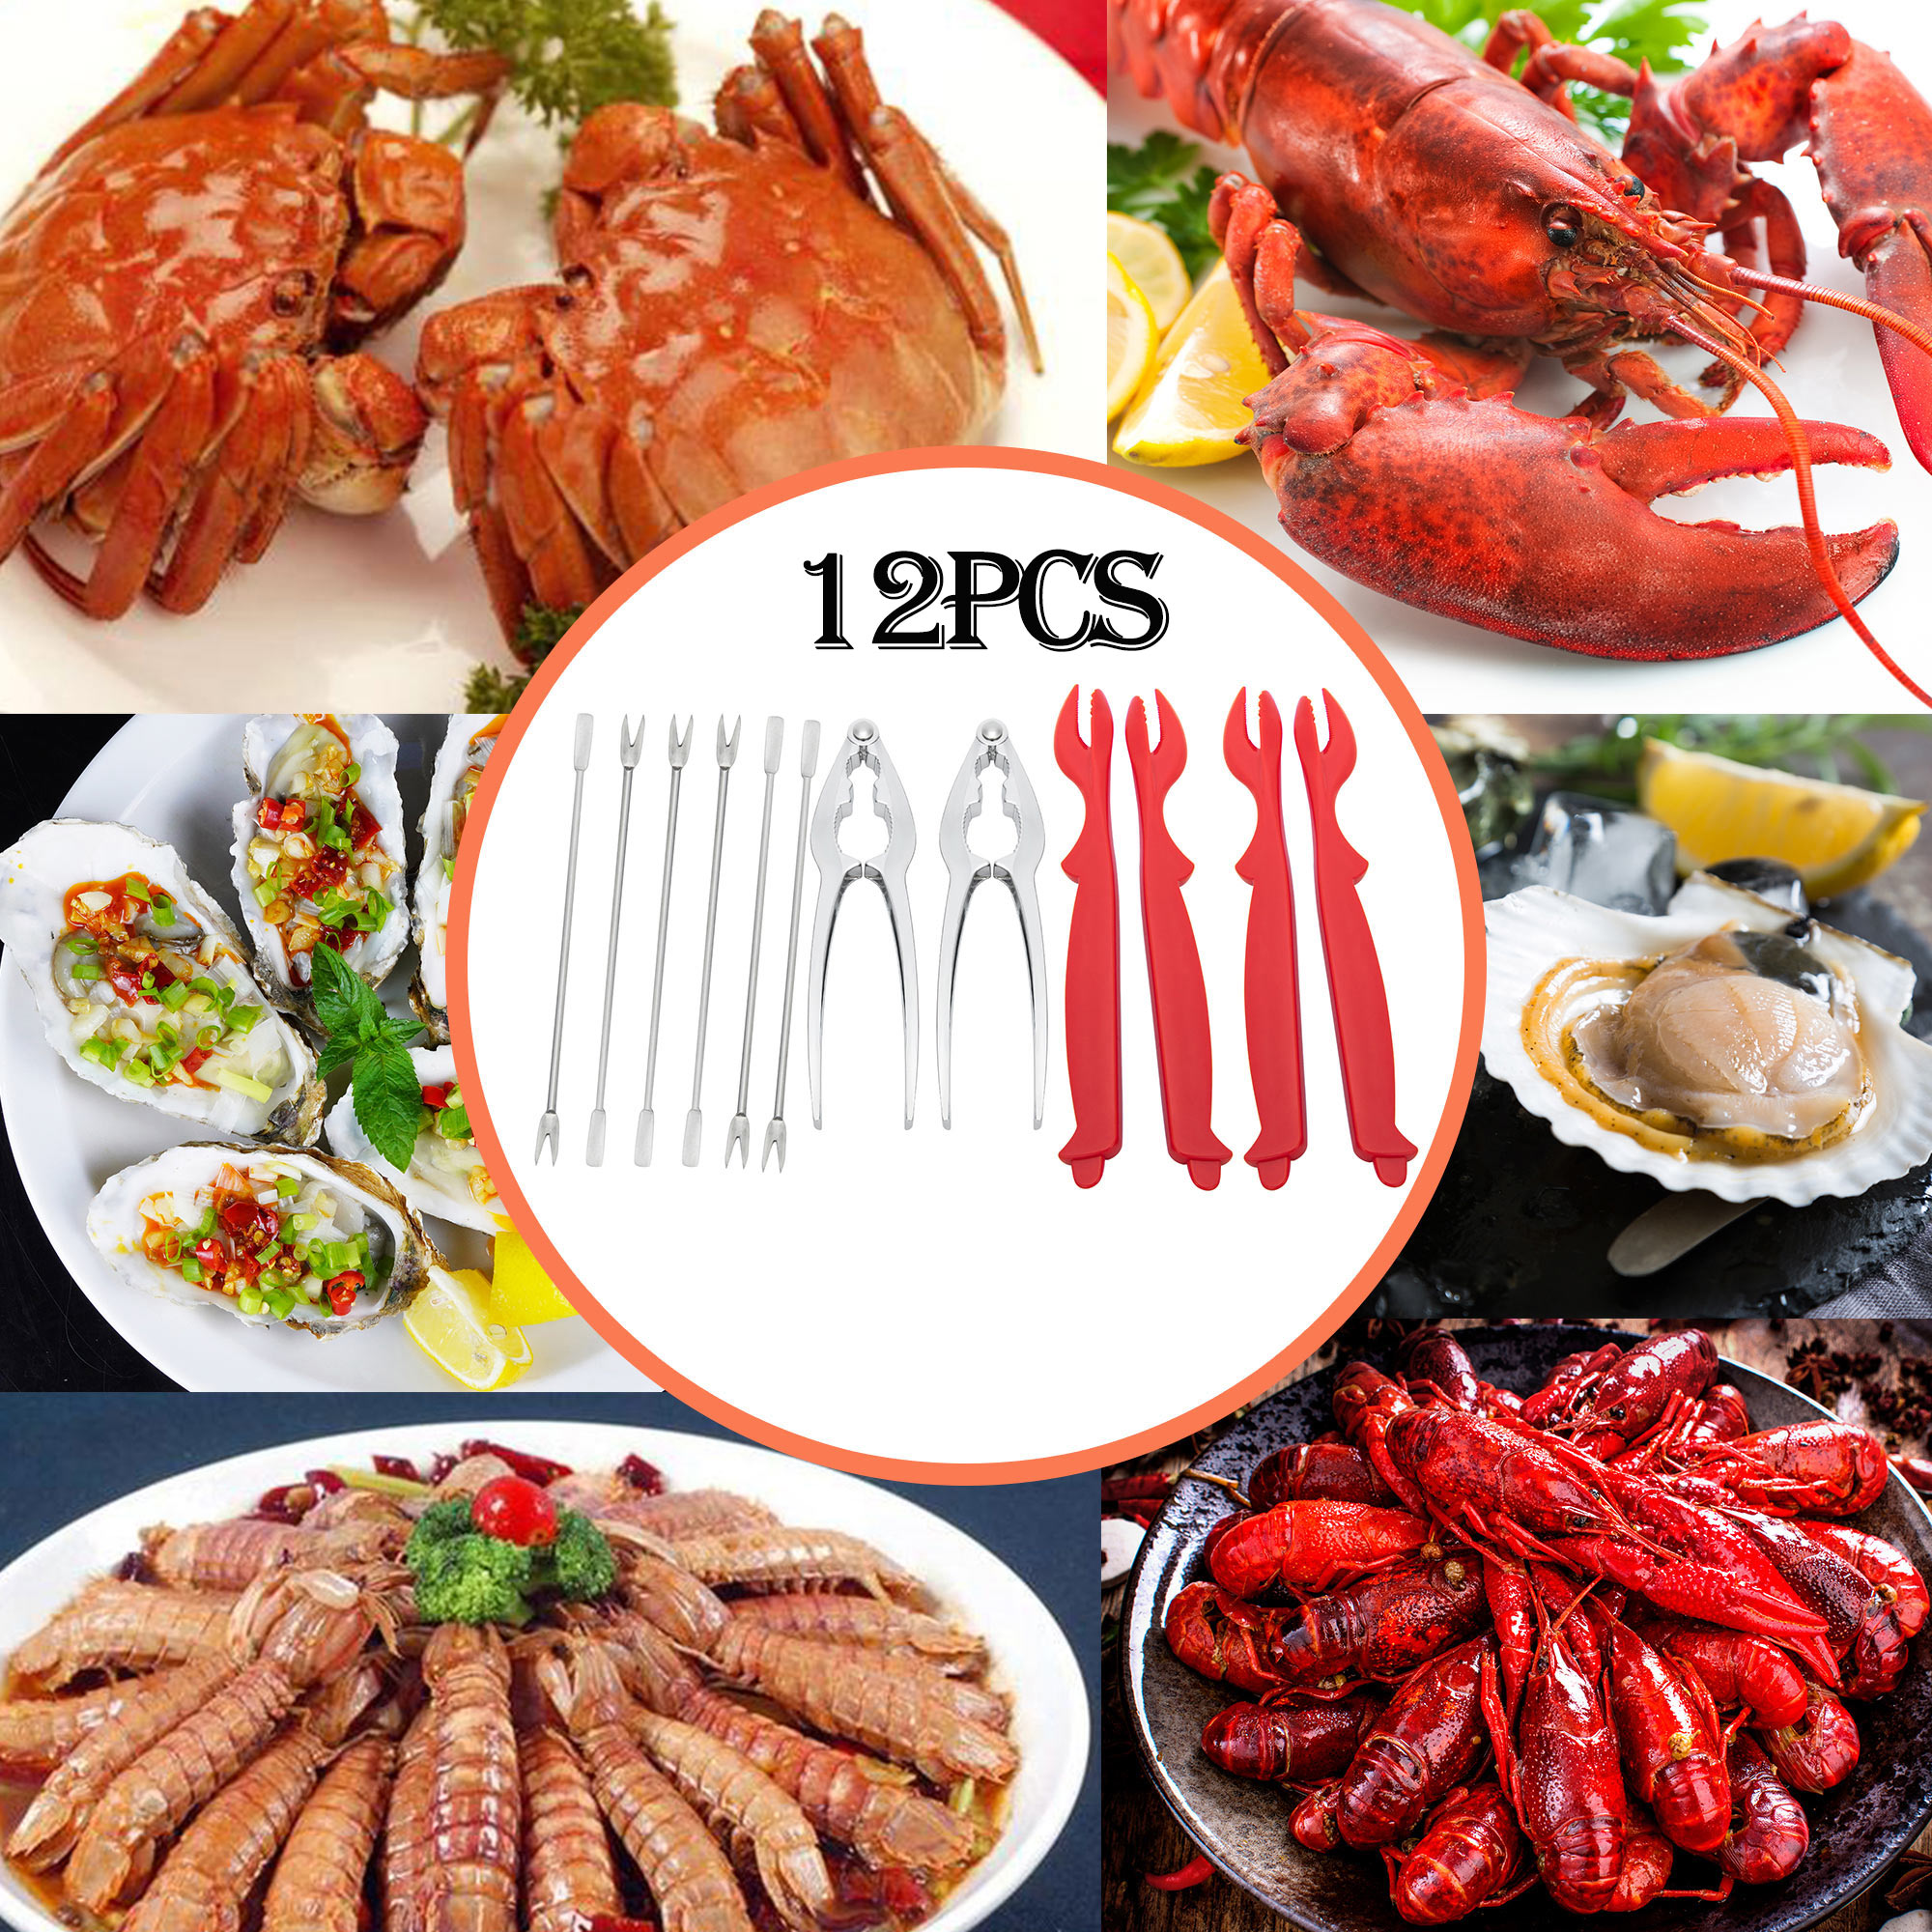 Heavy Duty Seafood Cracker Tools Nut Crackers for Crab Legs Lobster Crackers Nut Cracker Set 12 PACK